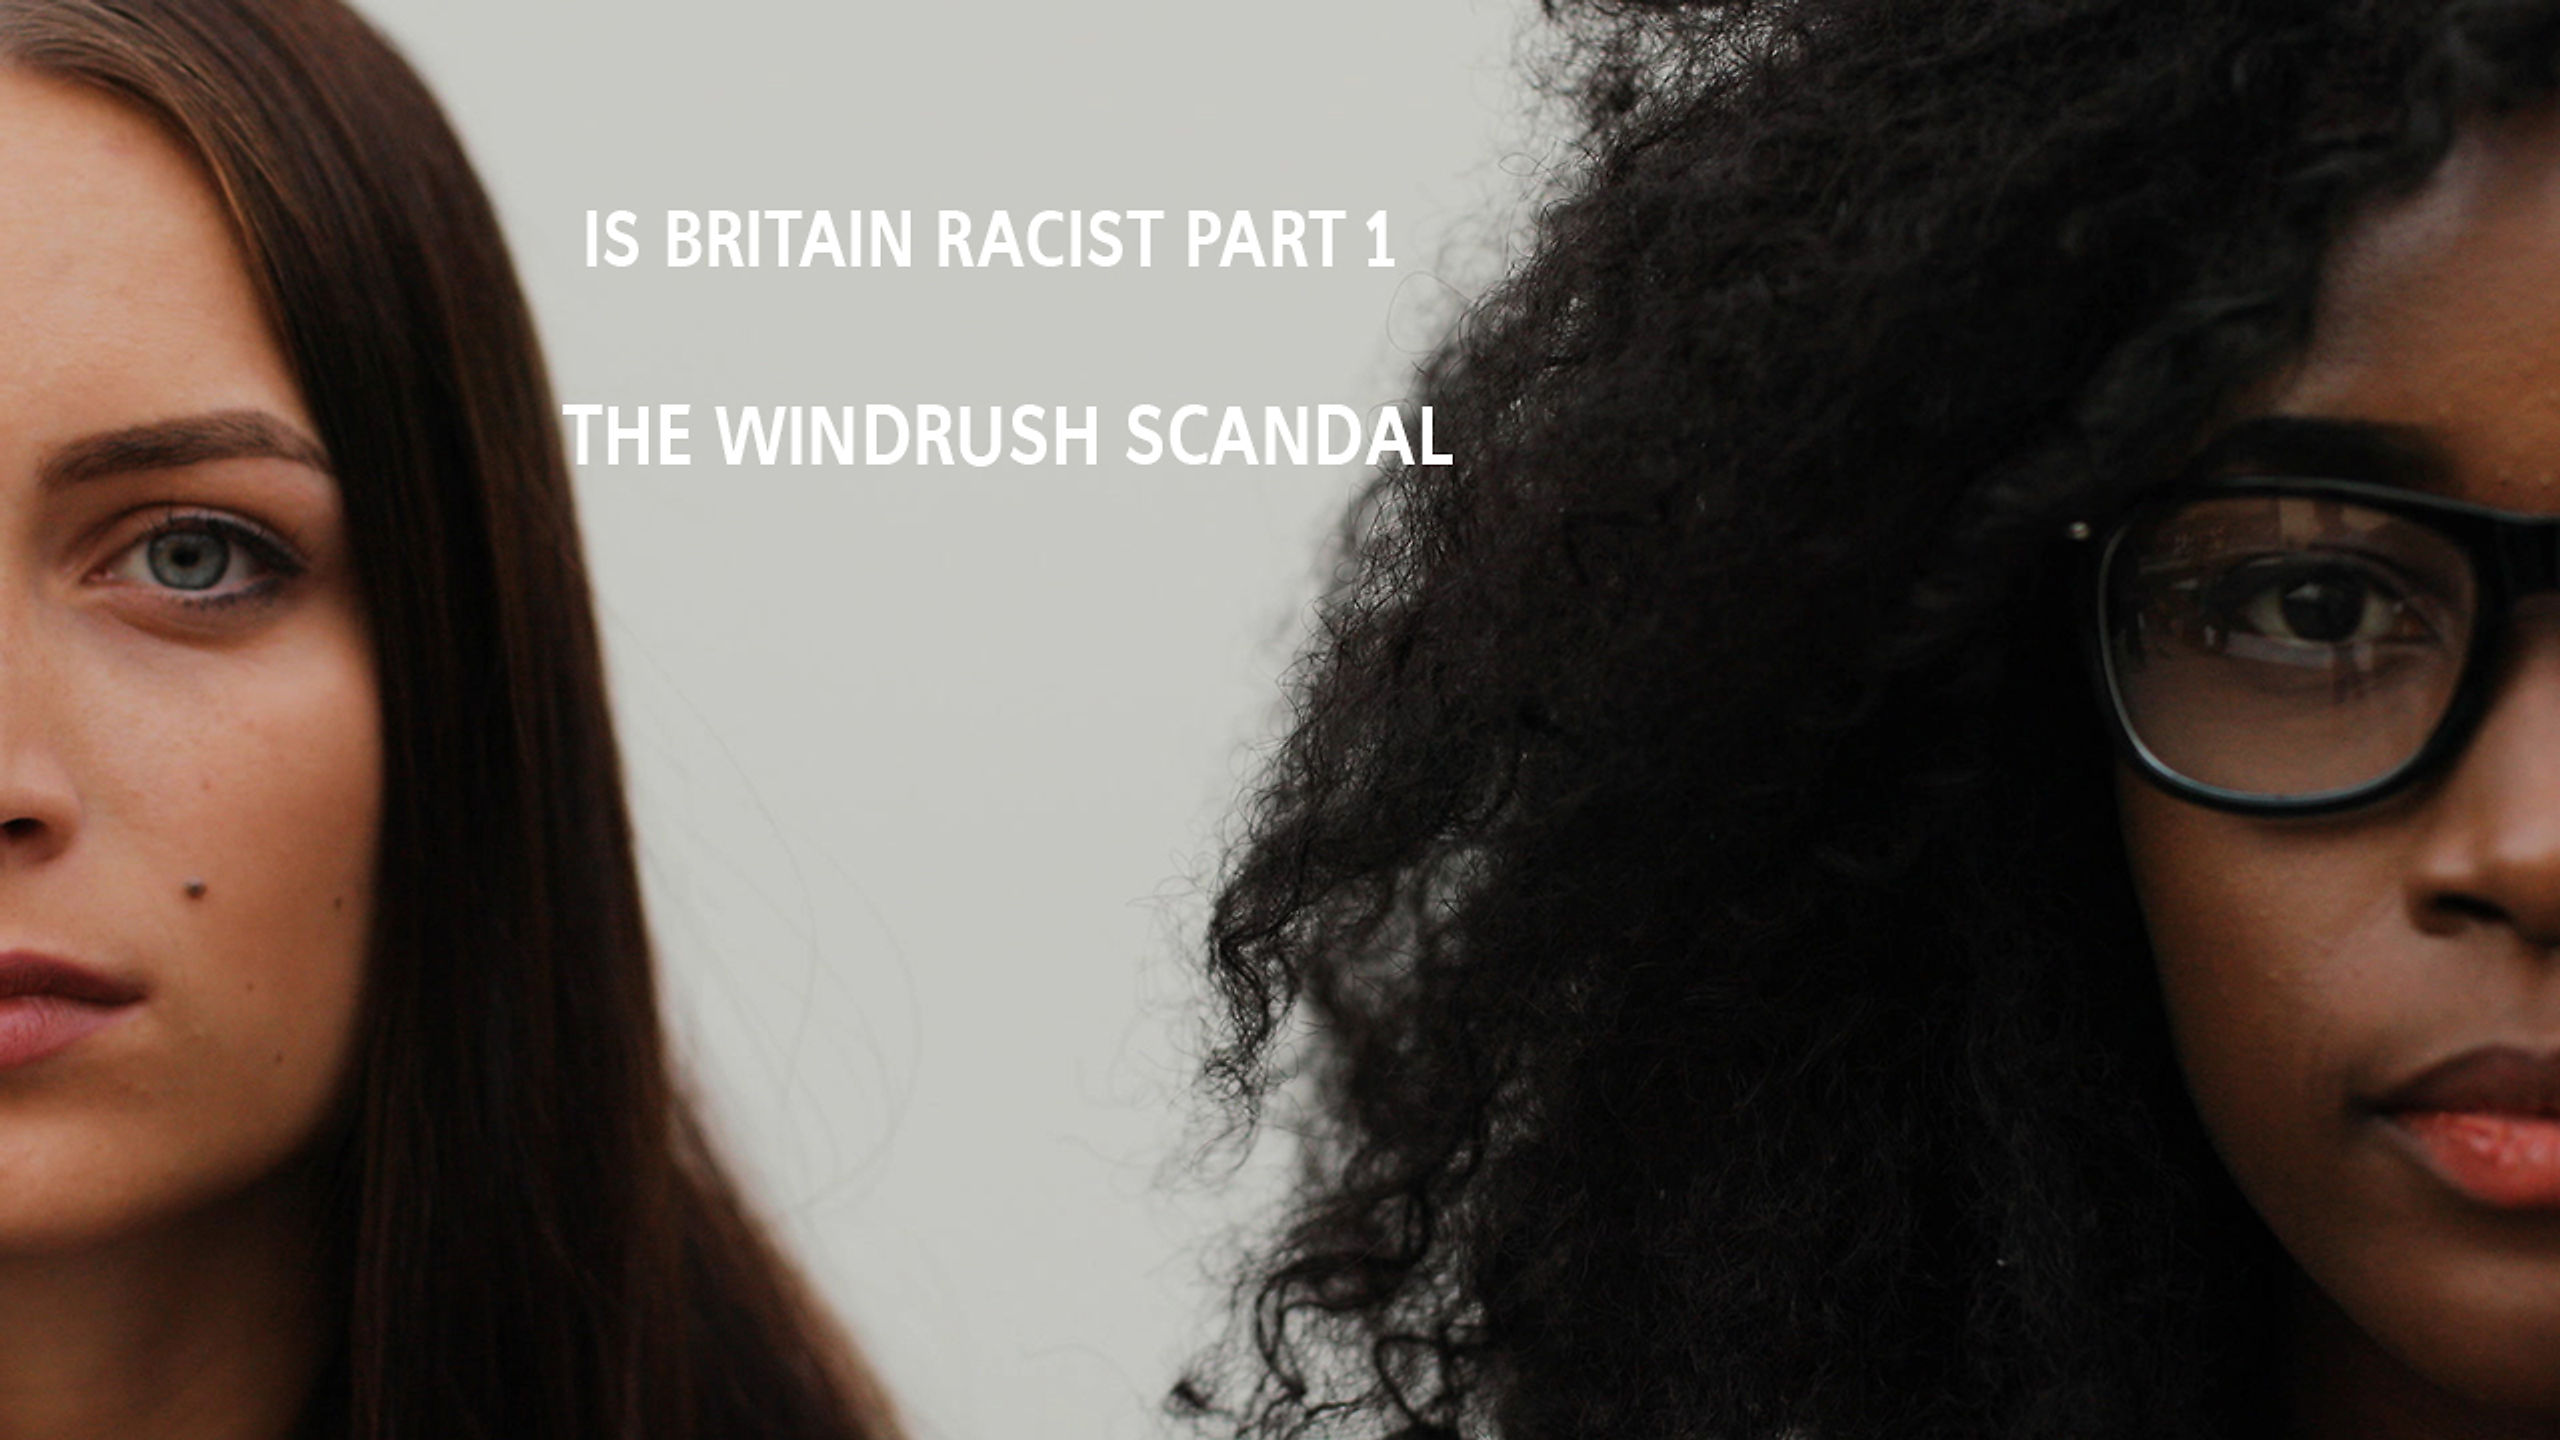 Is Britain racist? - Part 1 - The Windrush scandal